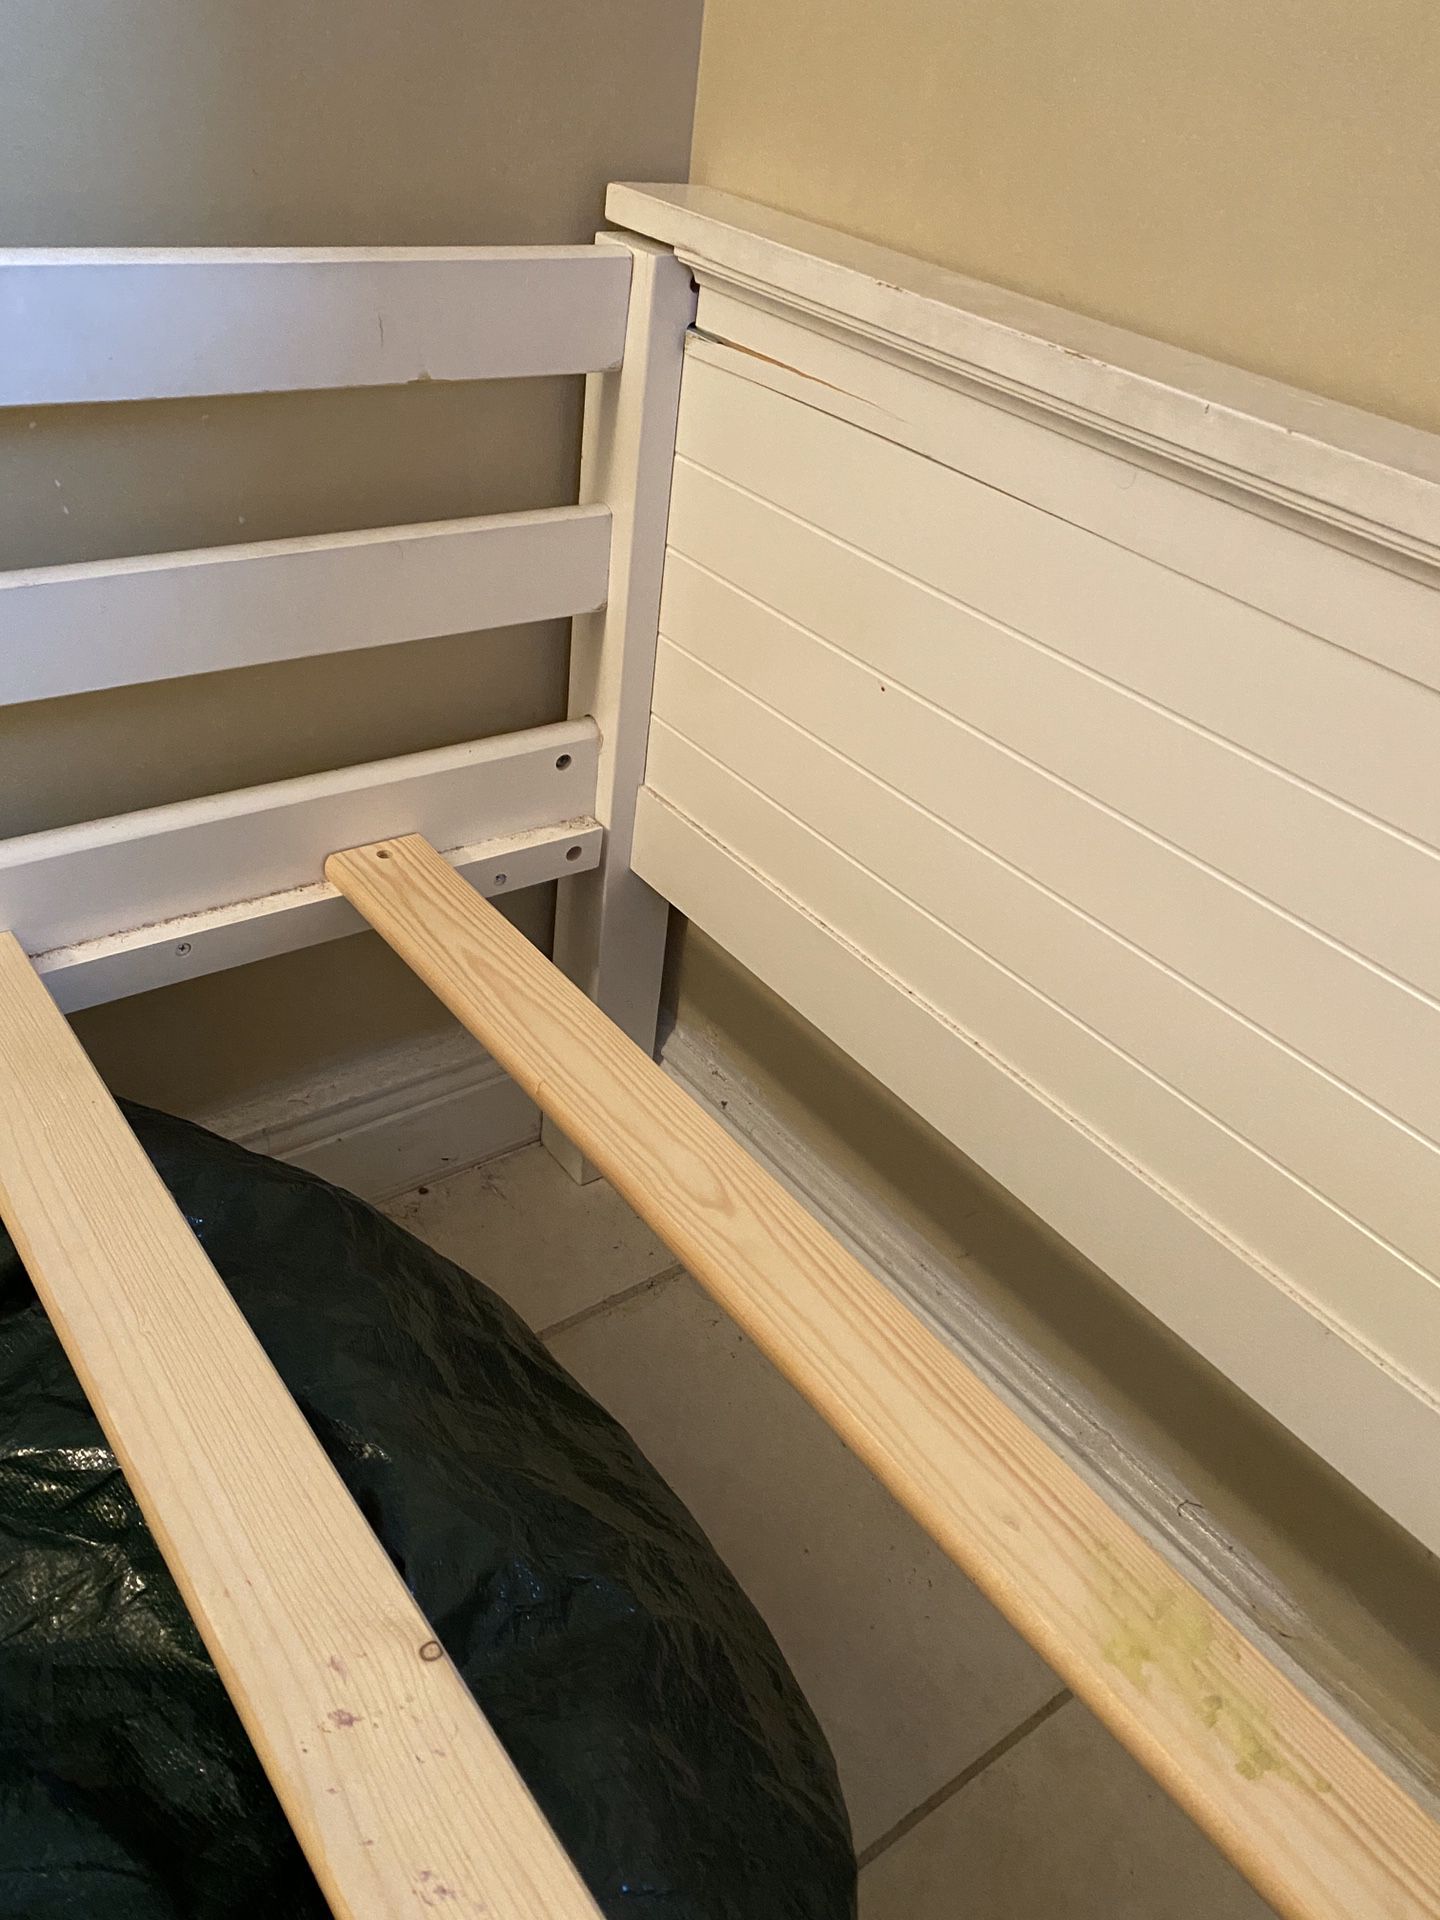 Twin bed frame with rails